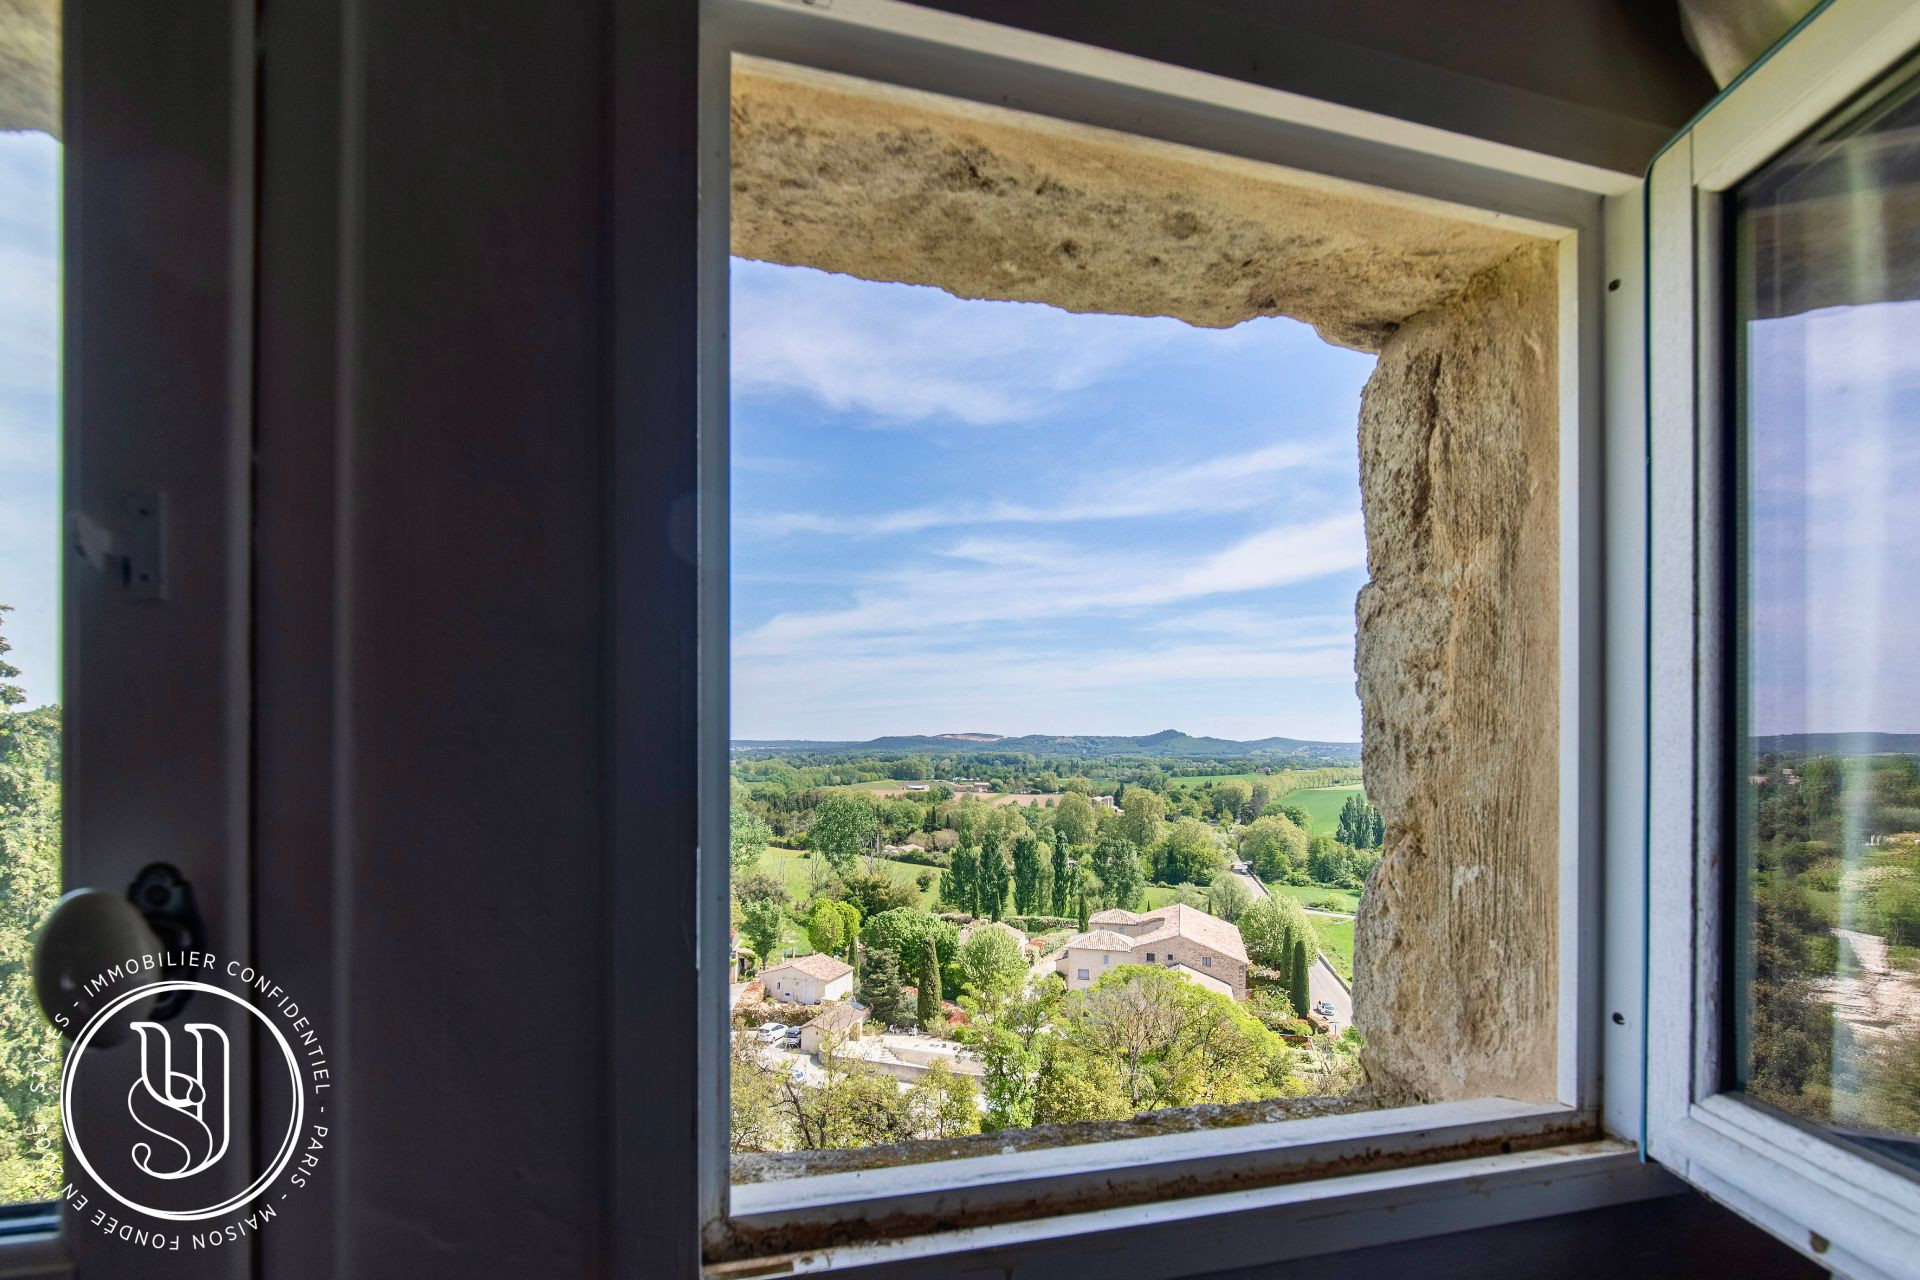 Uzès - Center, a unique property with panoramic views and character - image 9